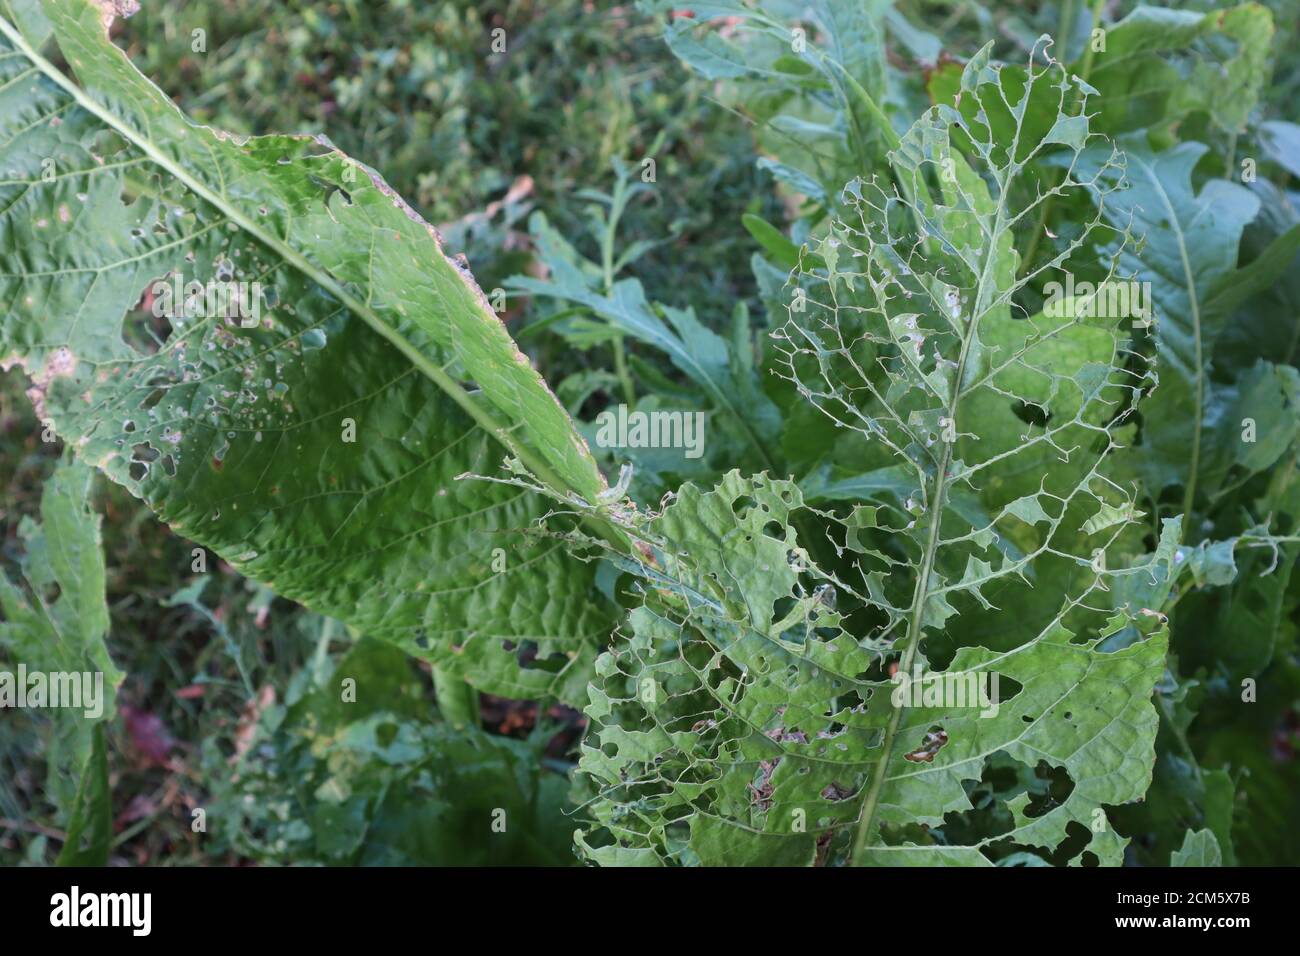 Leaf damage is seen on Horseradish leaves from garden pests Stock Photo